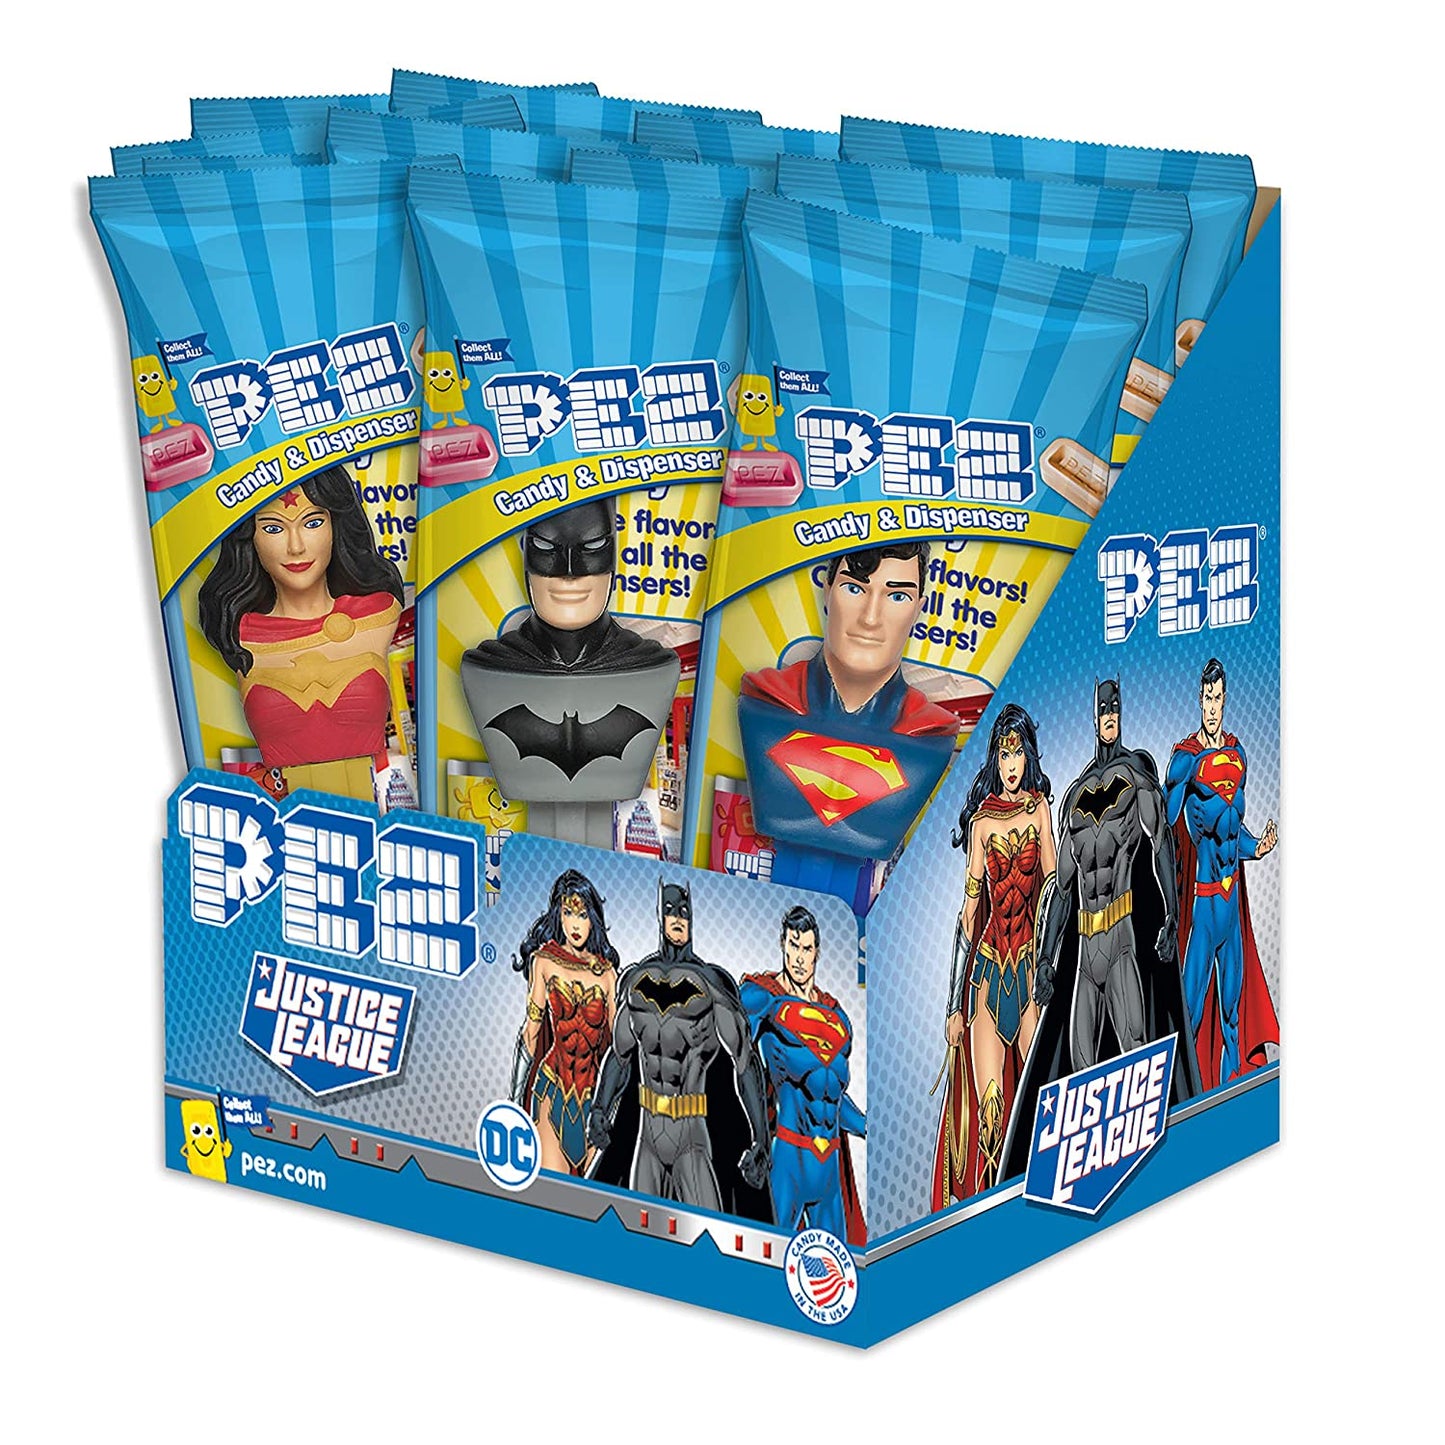 PEZ Candy Dc Comics Justice League Assortment Candy Dispensers, 6.96 Ounce (Pack of 12)